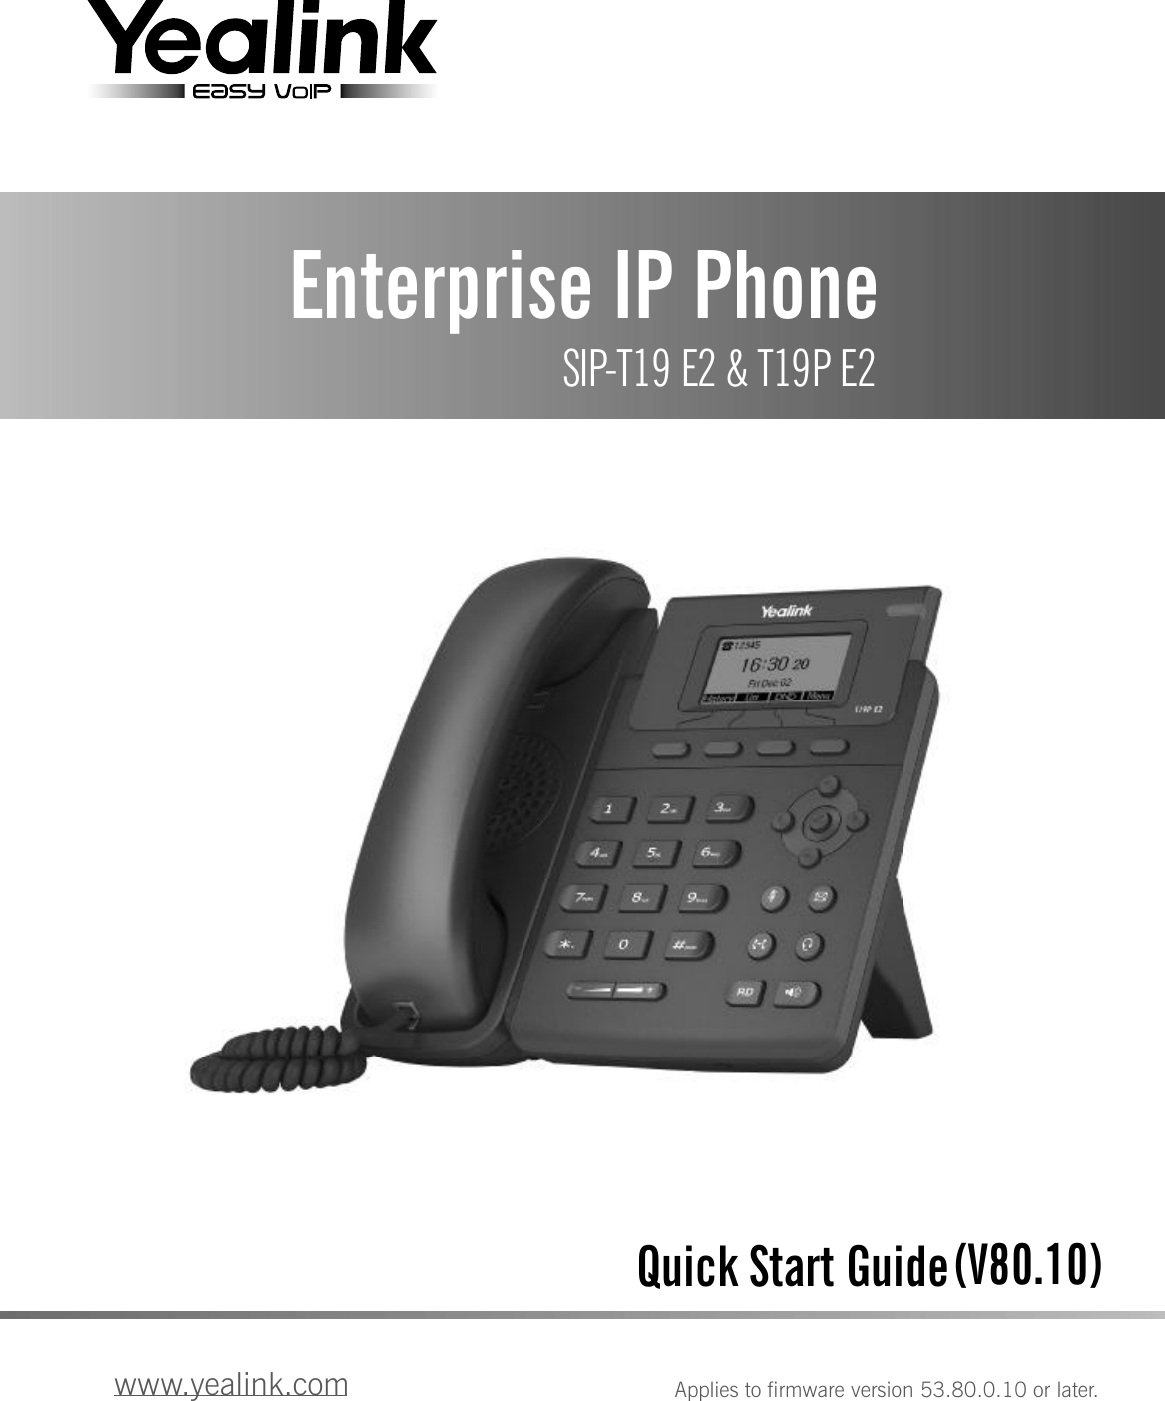 Enterprise IP Phone SIP-T19 E2 &amp; T19P E2Quick Start Guidewww.yealink.com Applies to firmware version 53.80.0.10 or later.(V80.10)